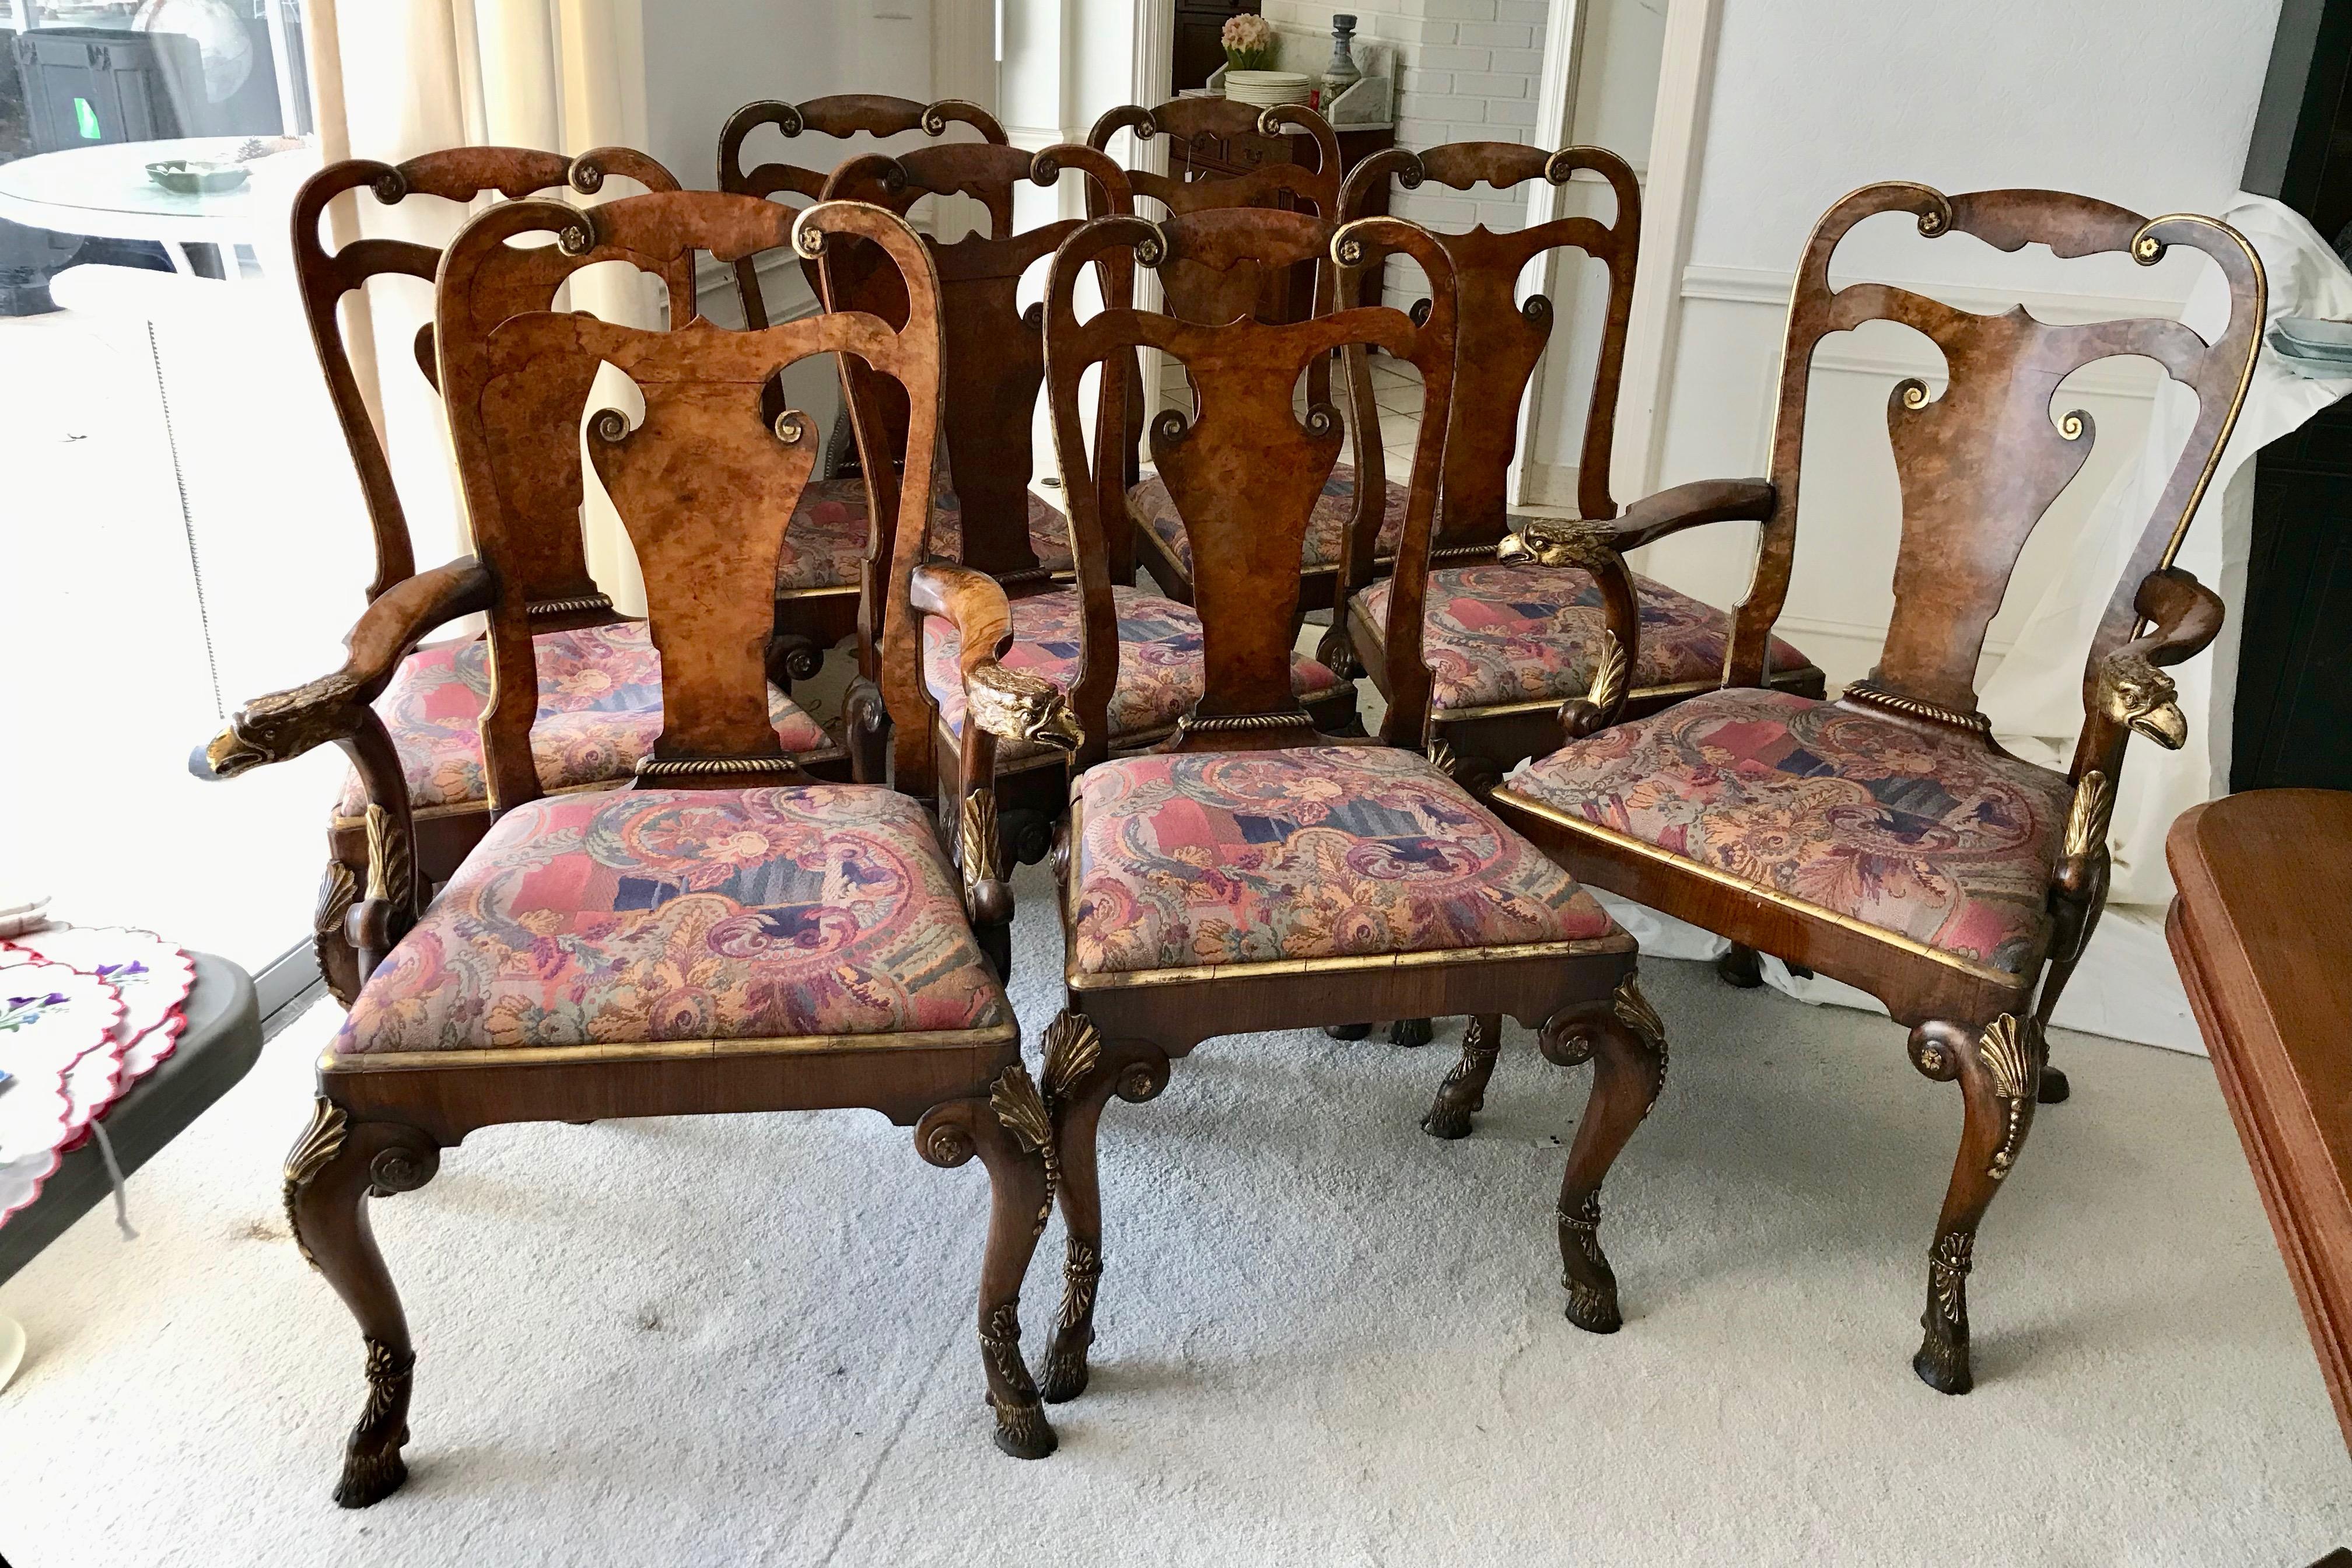 Superb quality and highly stylized form. The chairs are fashioned with fine
burl walnut back rests and appointed with gilt eagle heads on the arm rests of the
